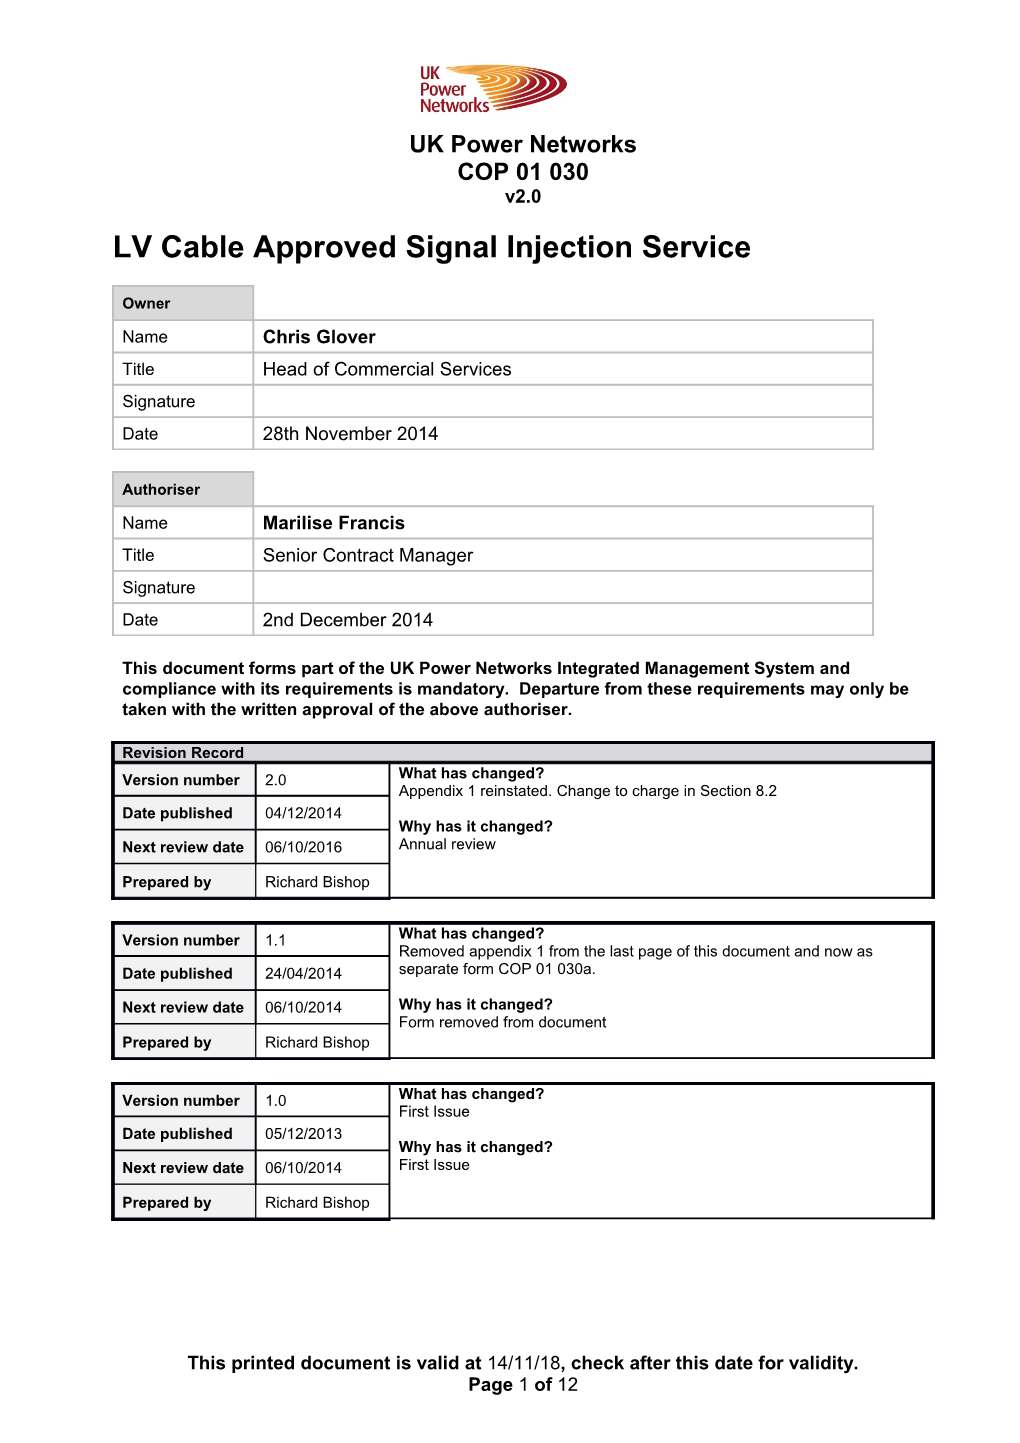 COP 01 030 LV Cable Approved Signal Injection Service